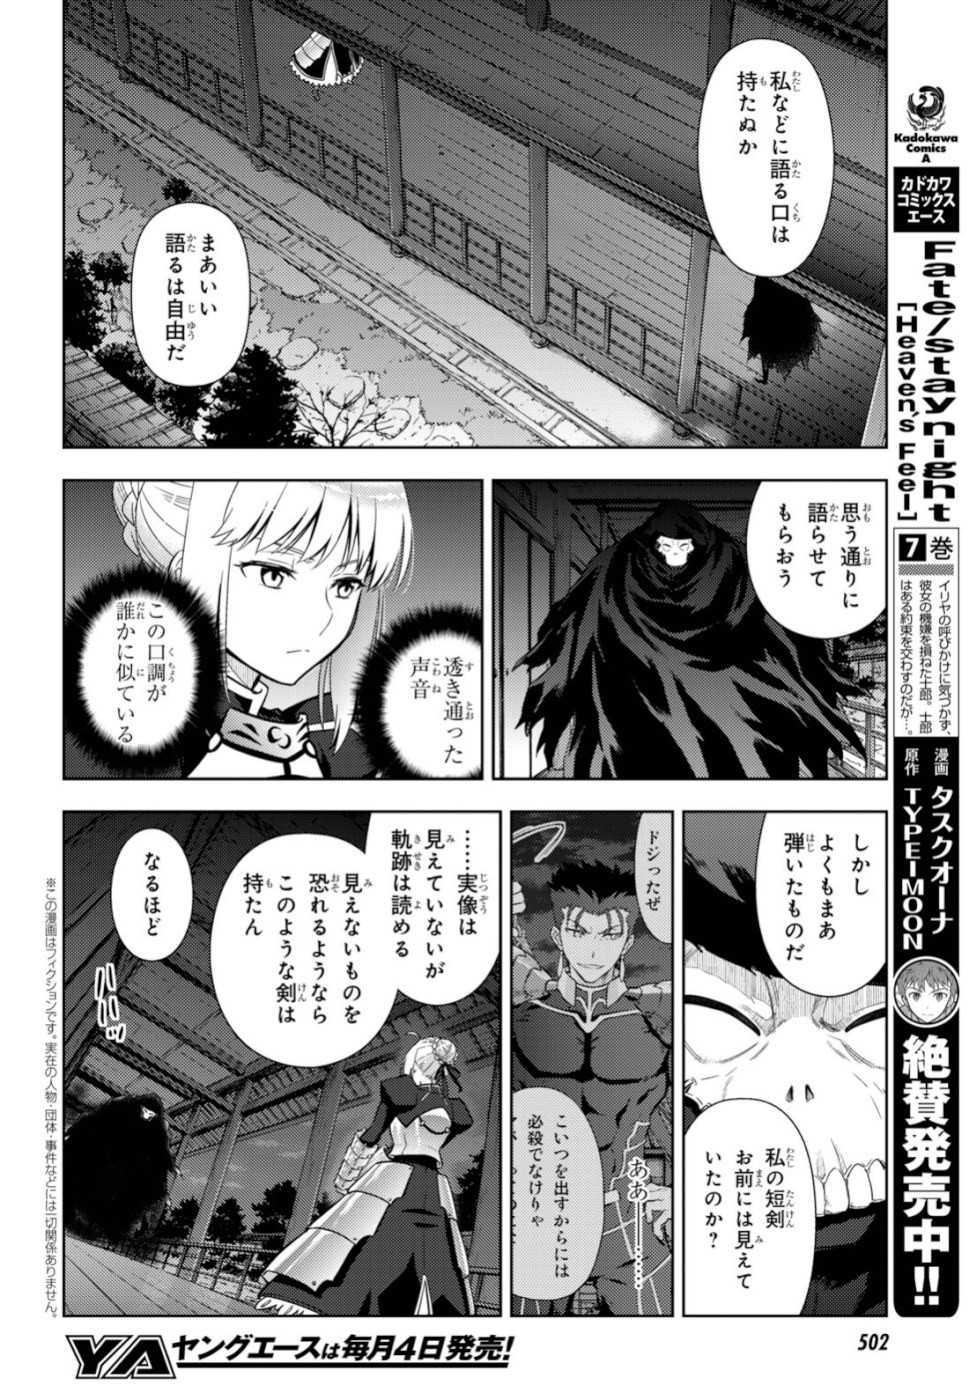 Fate/Stay night Heaven's Feel - Chapter 54 - Page 2